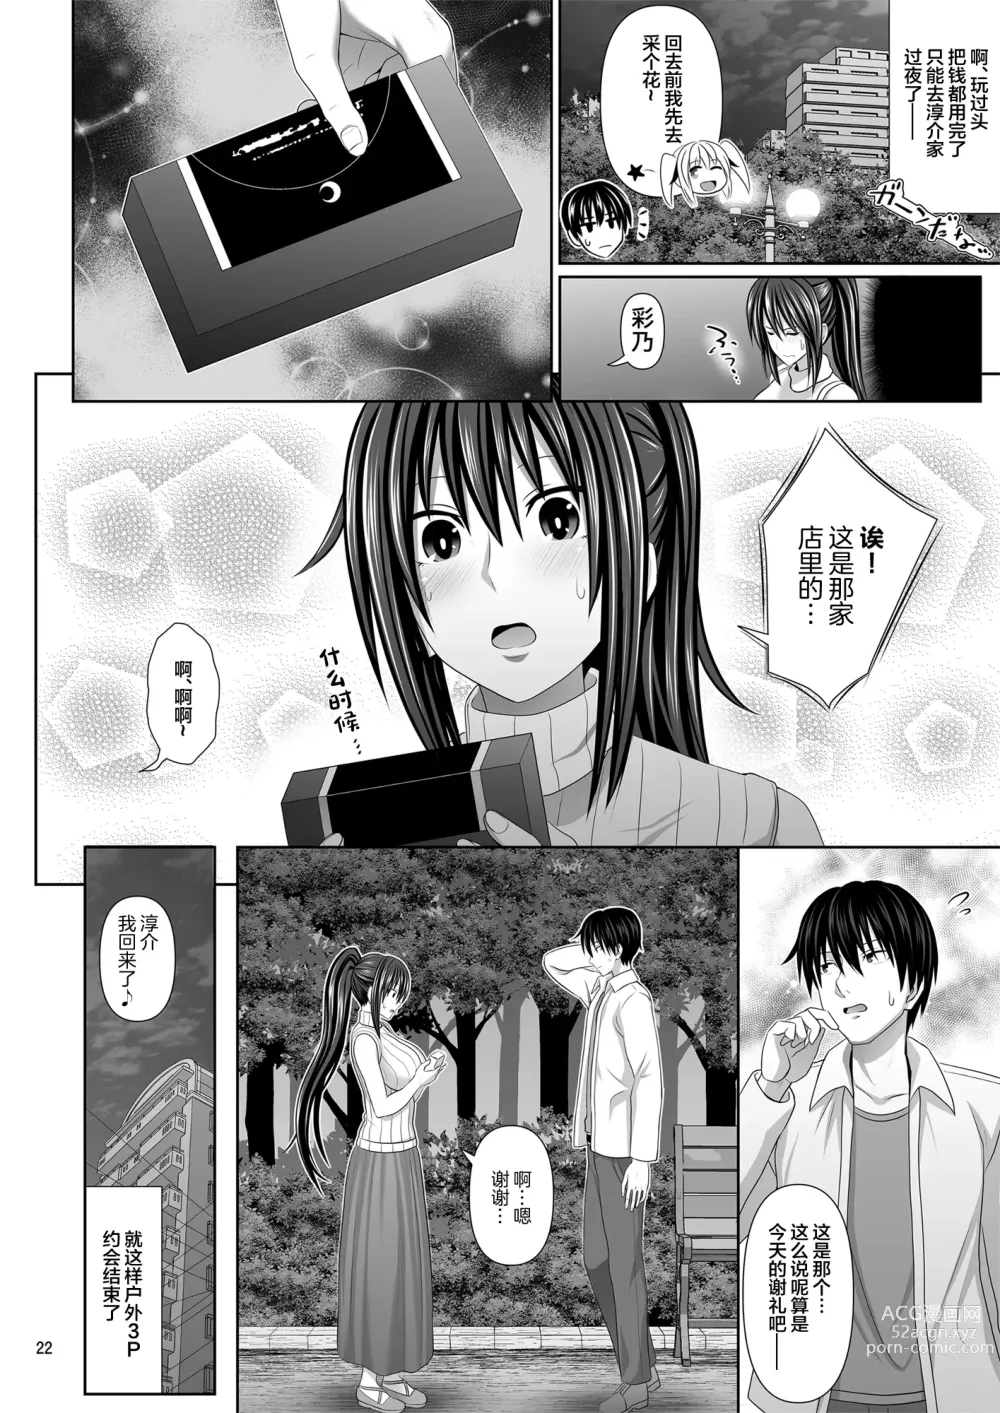 Page 22 of doujinshi SEX FRIEND 6